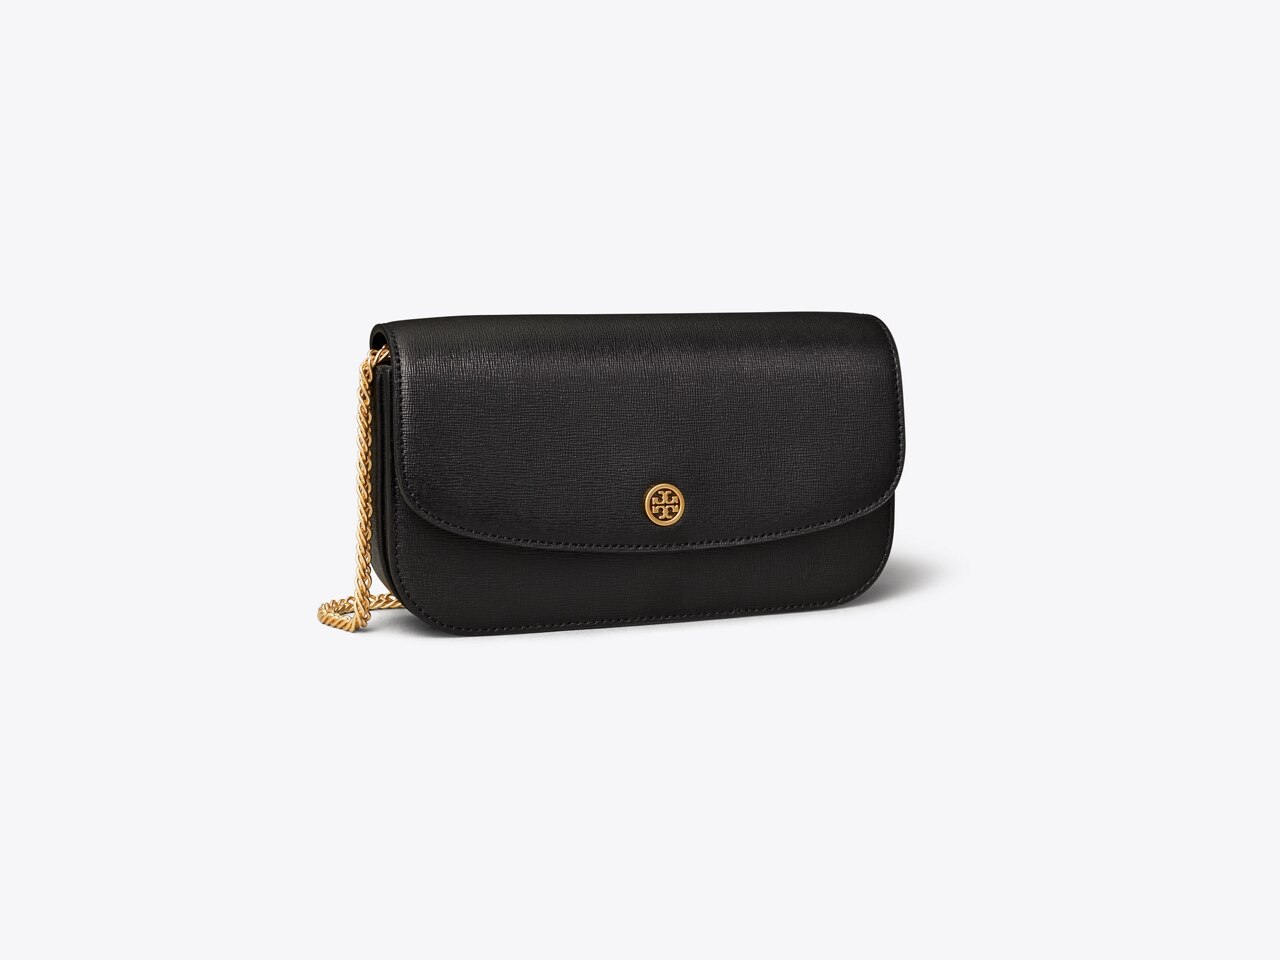 Tory Burch Robinson Chain Wallet In Black/gold | ModeSens